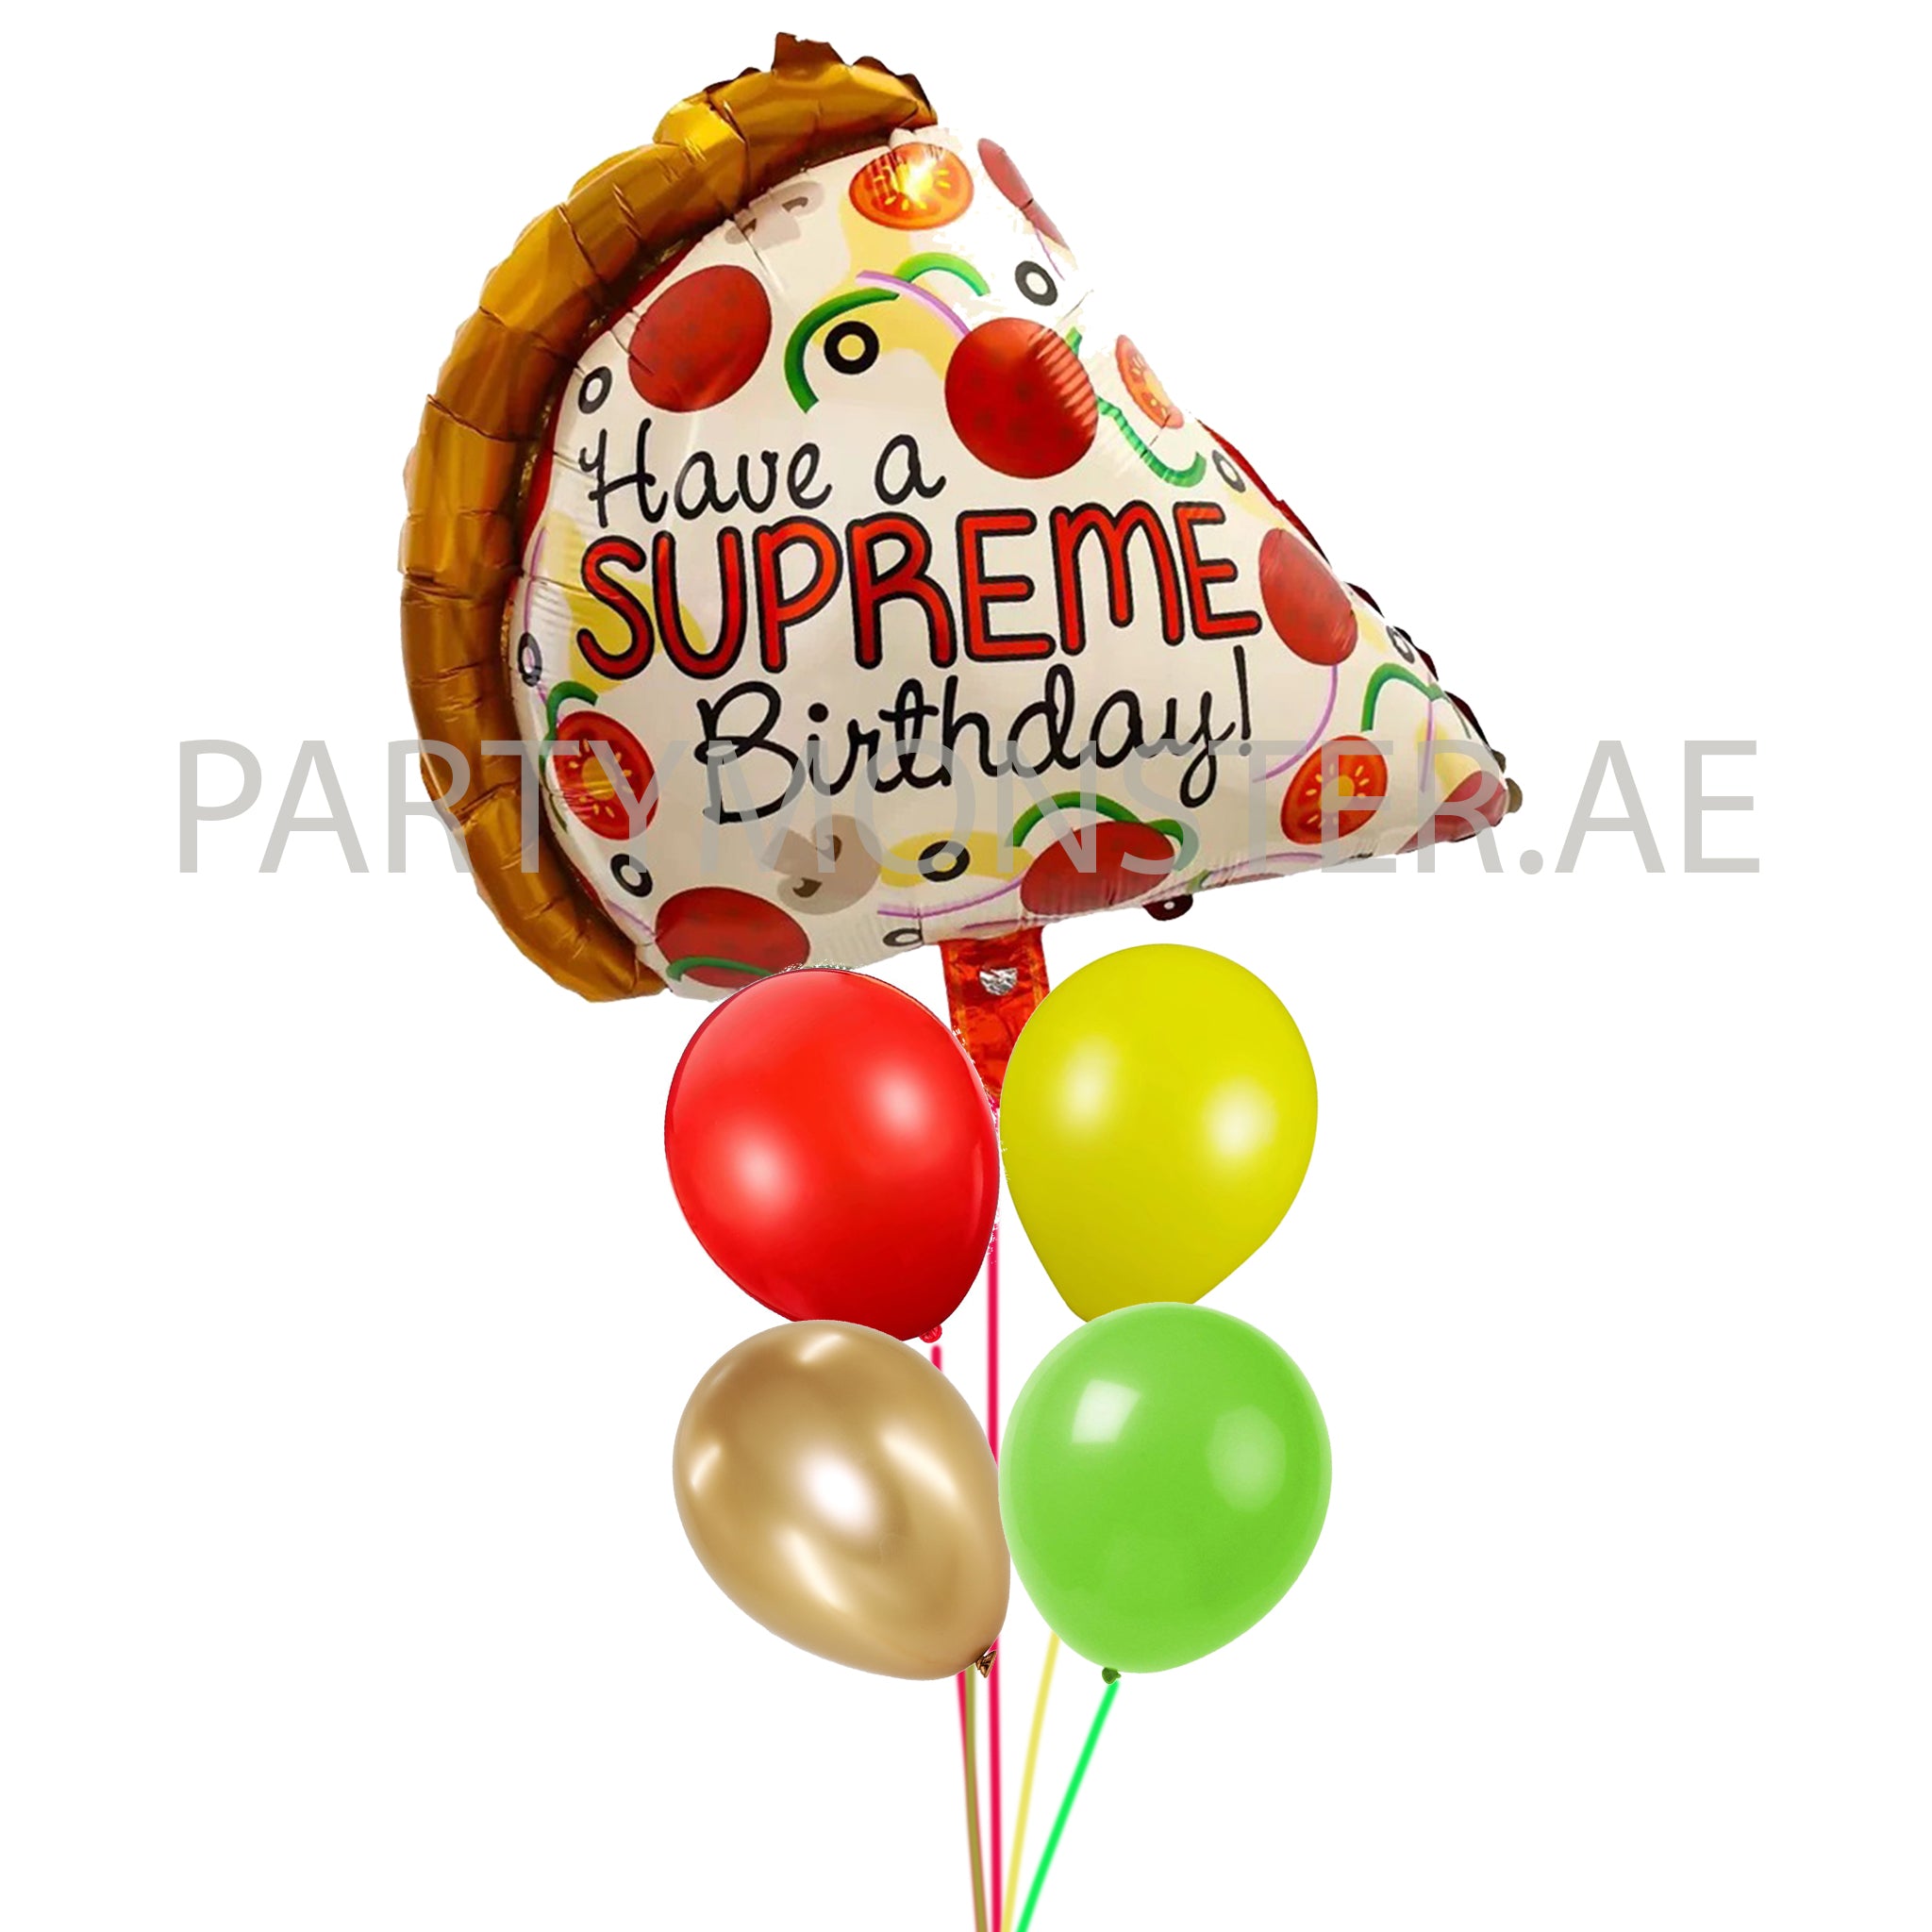 Supreme Pizza birthday balloons bouquet - PartyMonster.ae